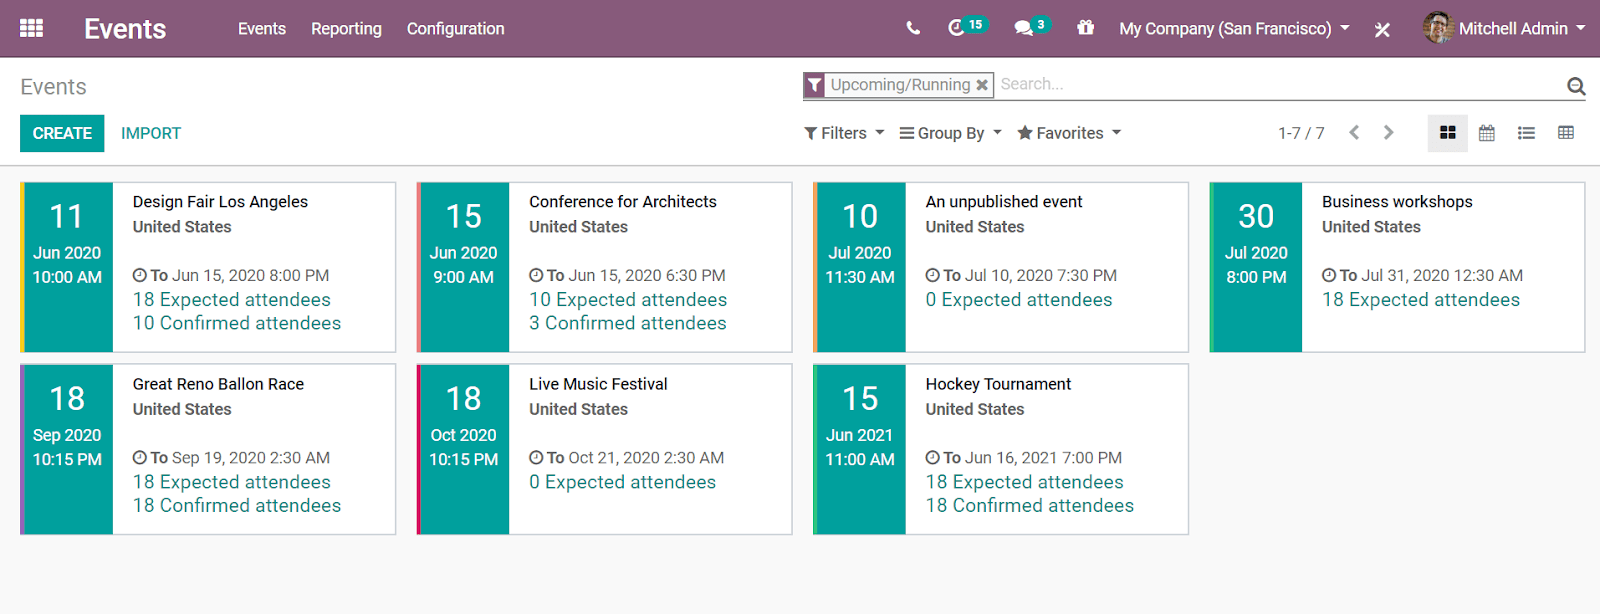 Overview of events with the kanban view in Odoo Events